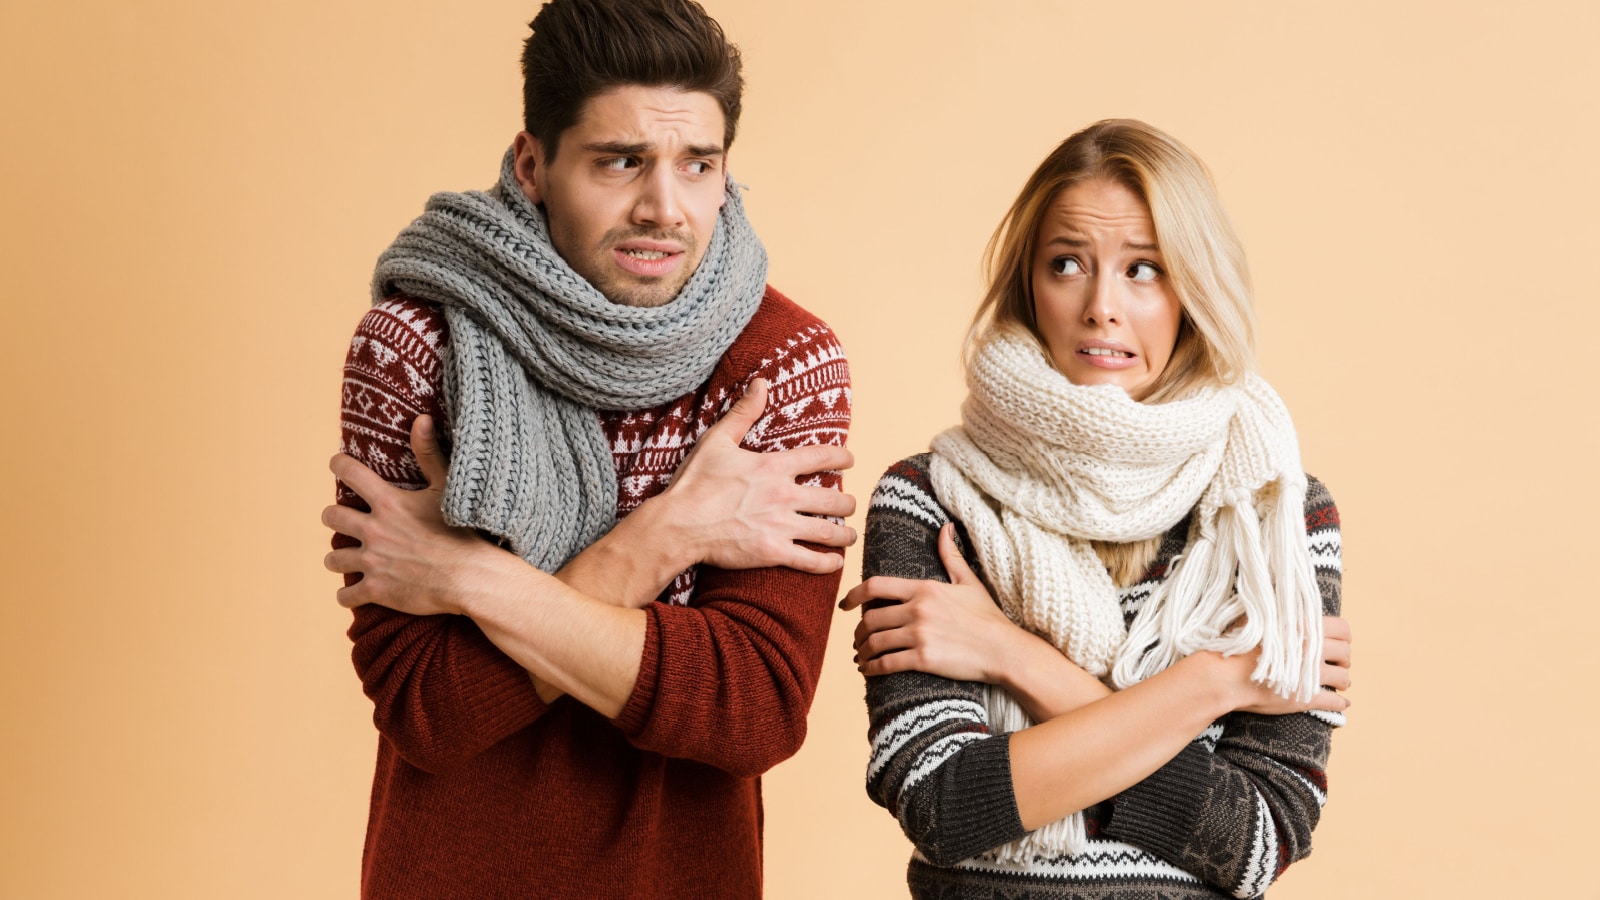 Portrait of a frozen young couple dressed in sweaters and scarves standing together isolated over beige background, shaking, looking at each other